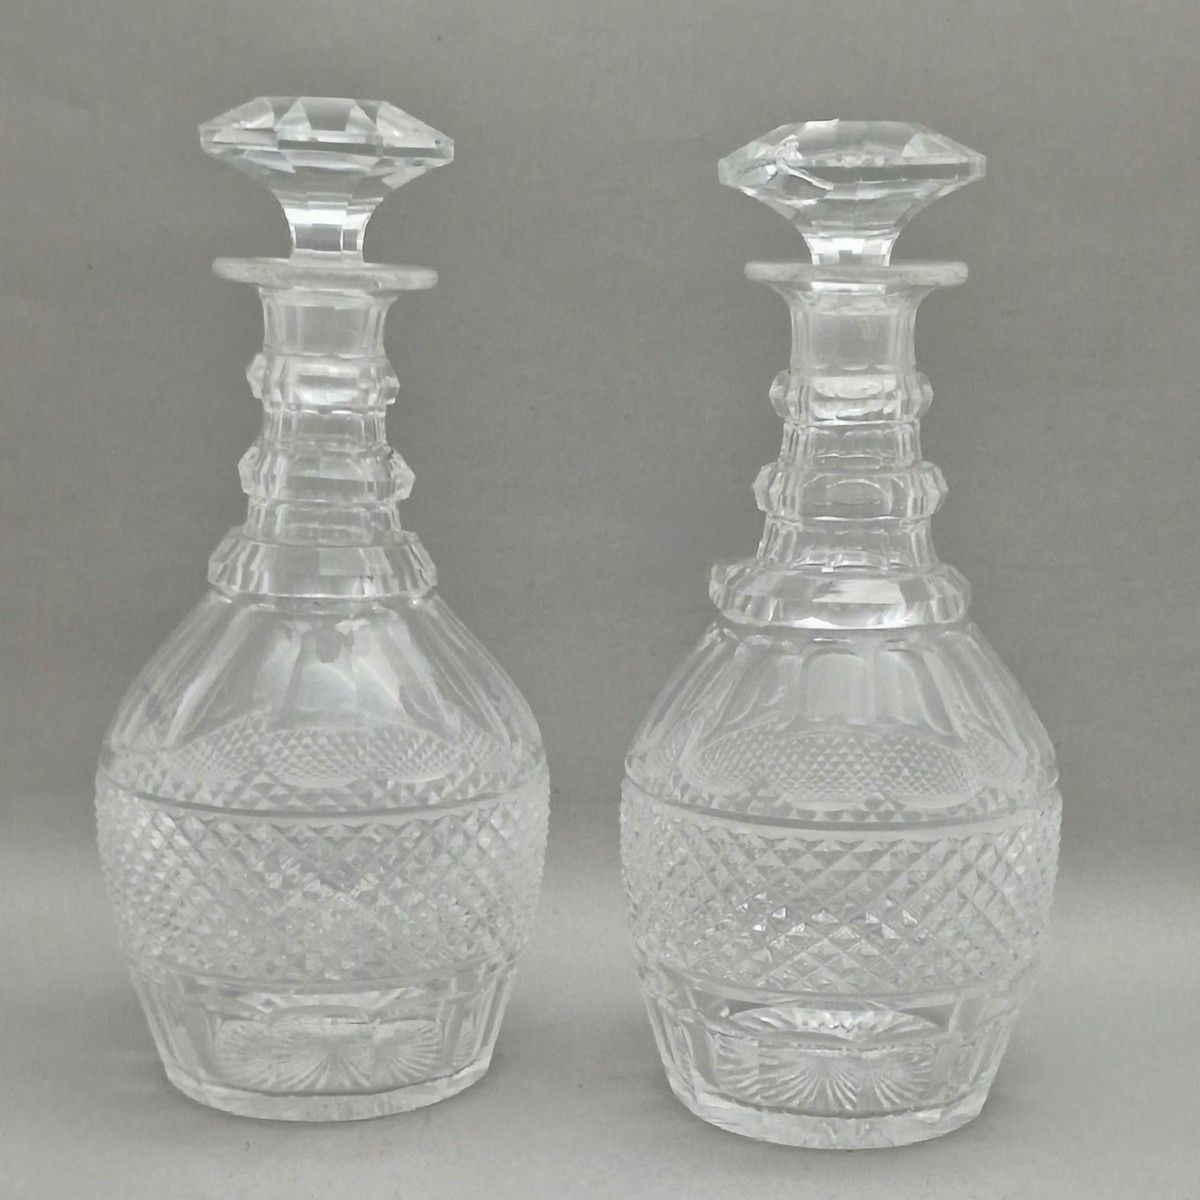 Null SAINT LOUIS - TRIANON MODEL (Created in 1834) - PAIR OF CARAFES in white cr&hellip;